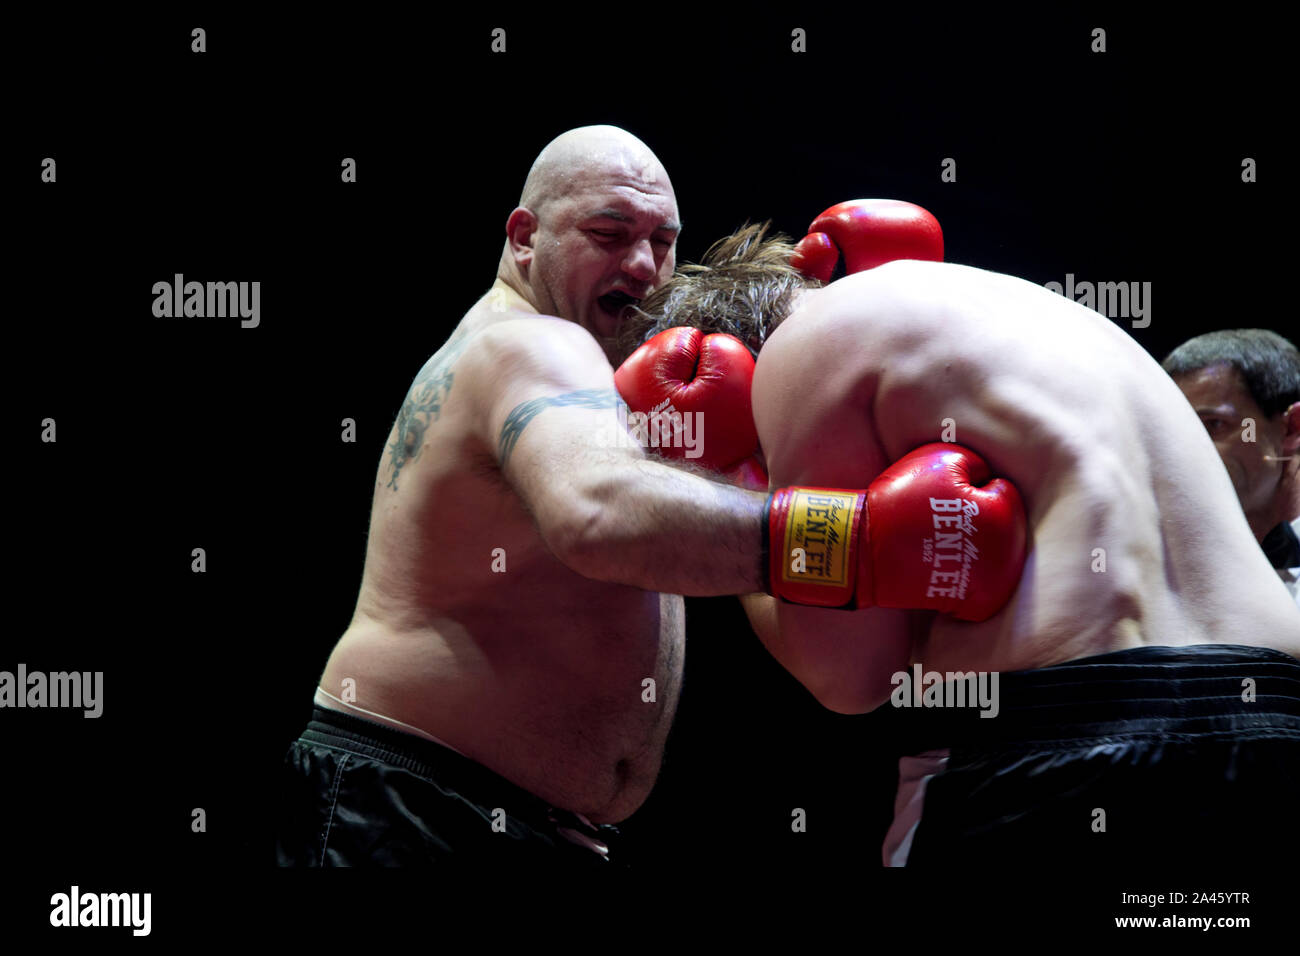 Moscow, Russia. 28th of November, 2013 Italian boxer Gianluca